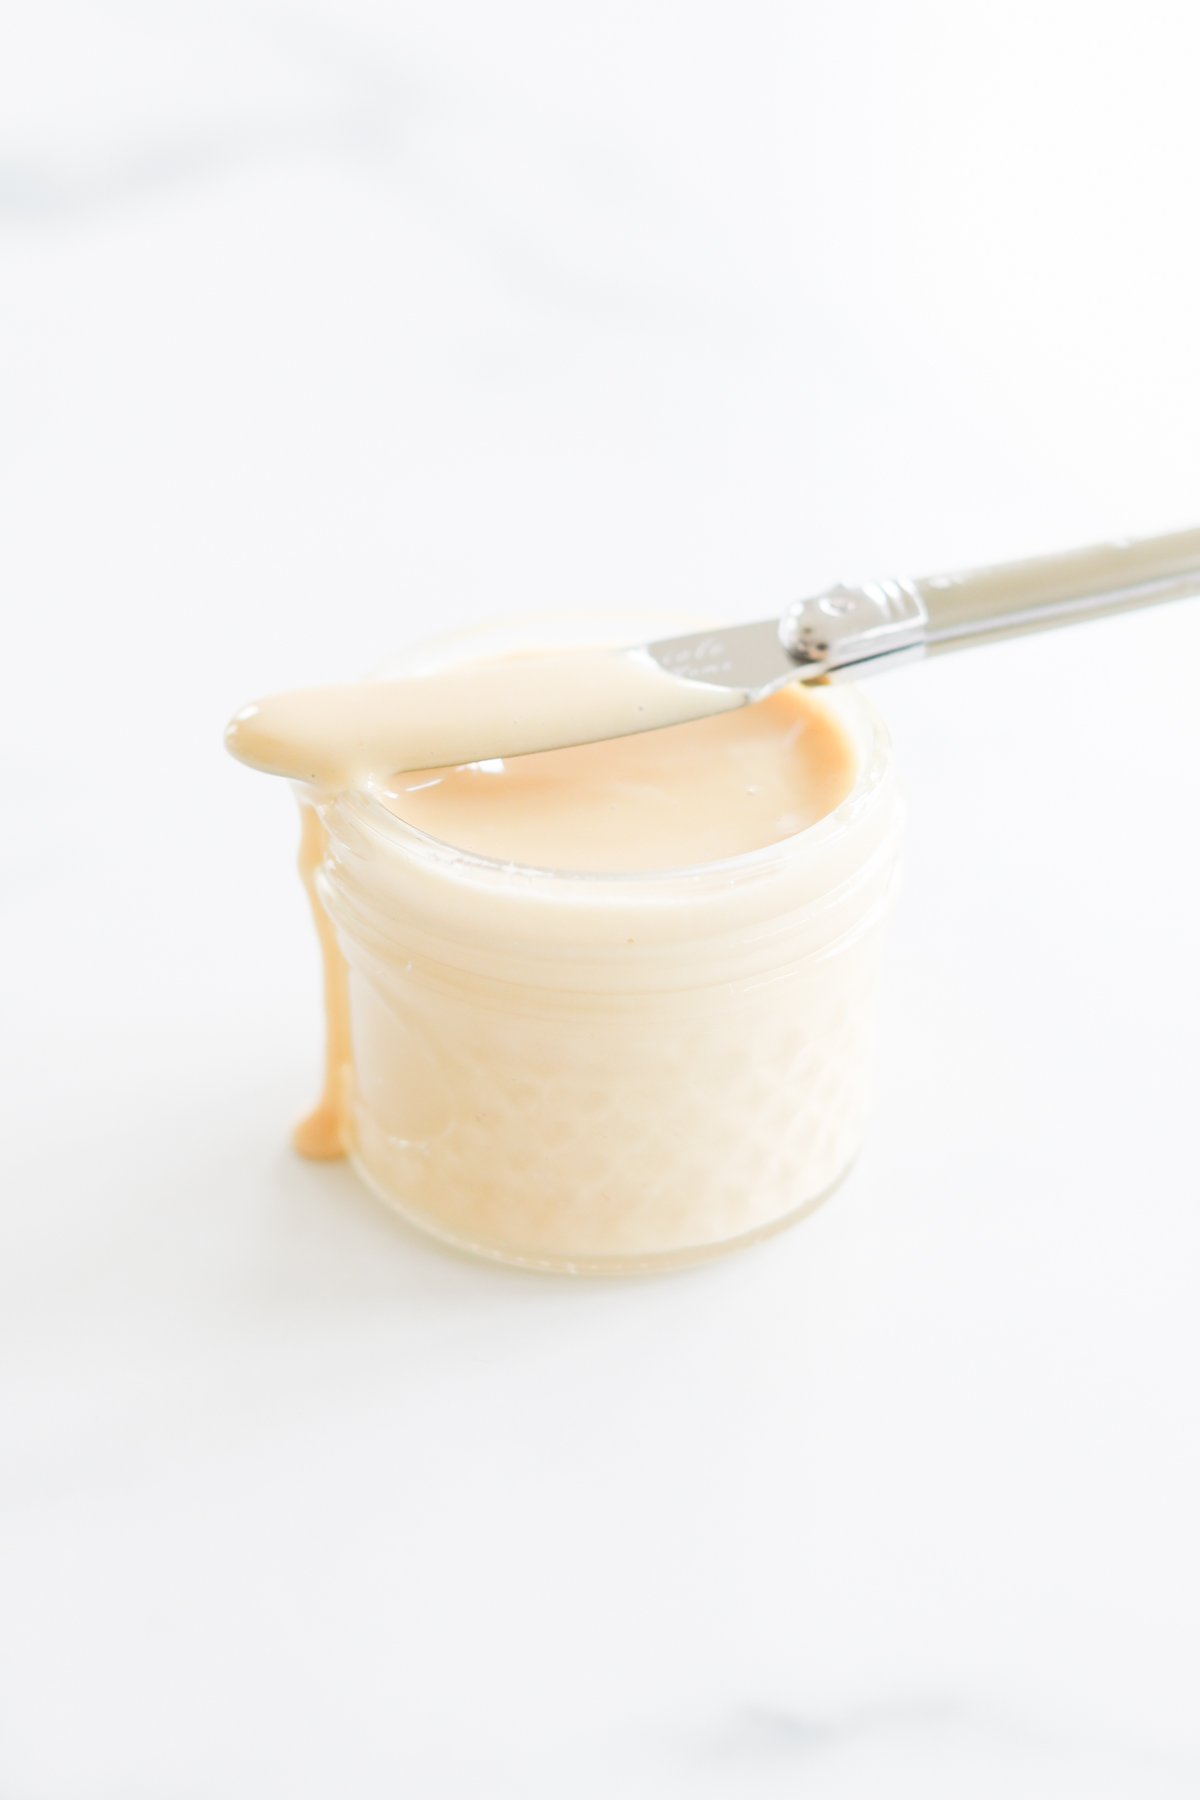 A jar of cream with a spatula on top.